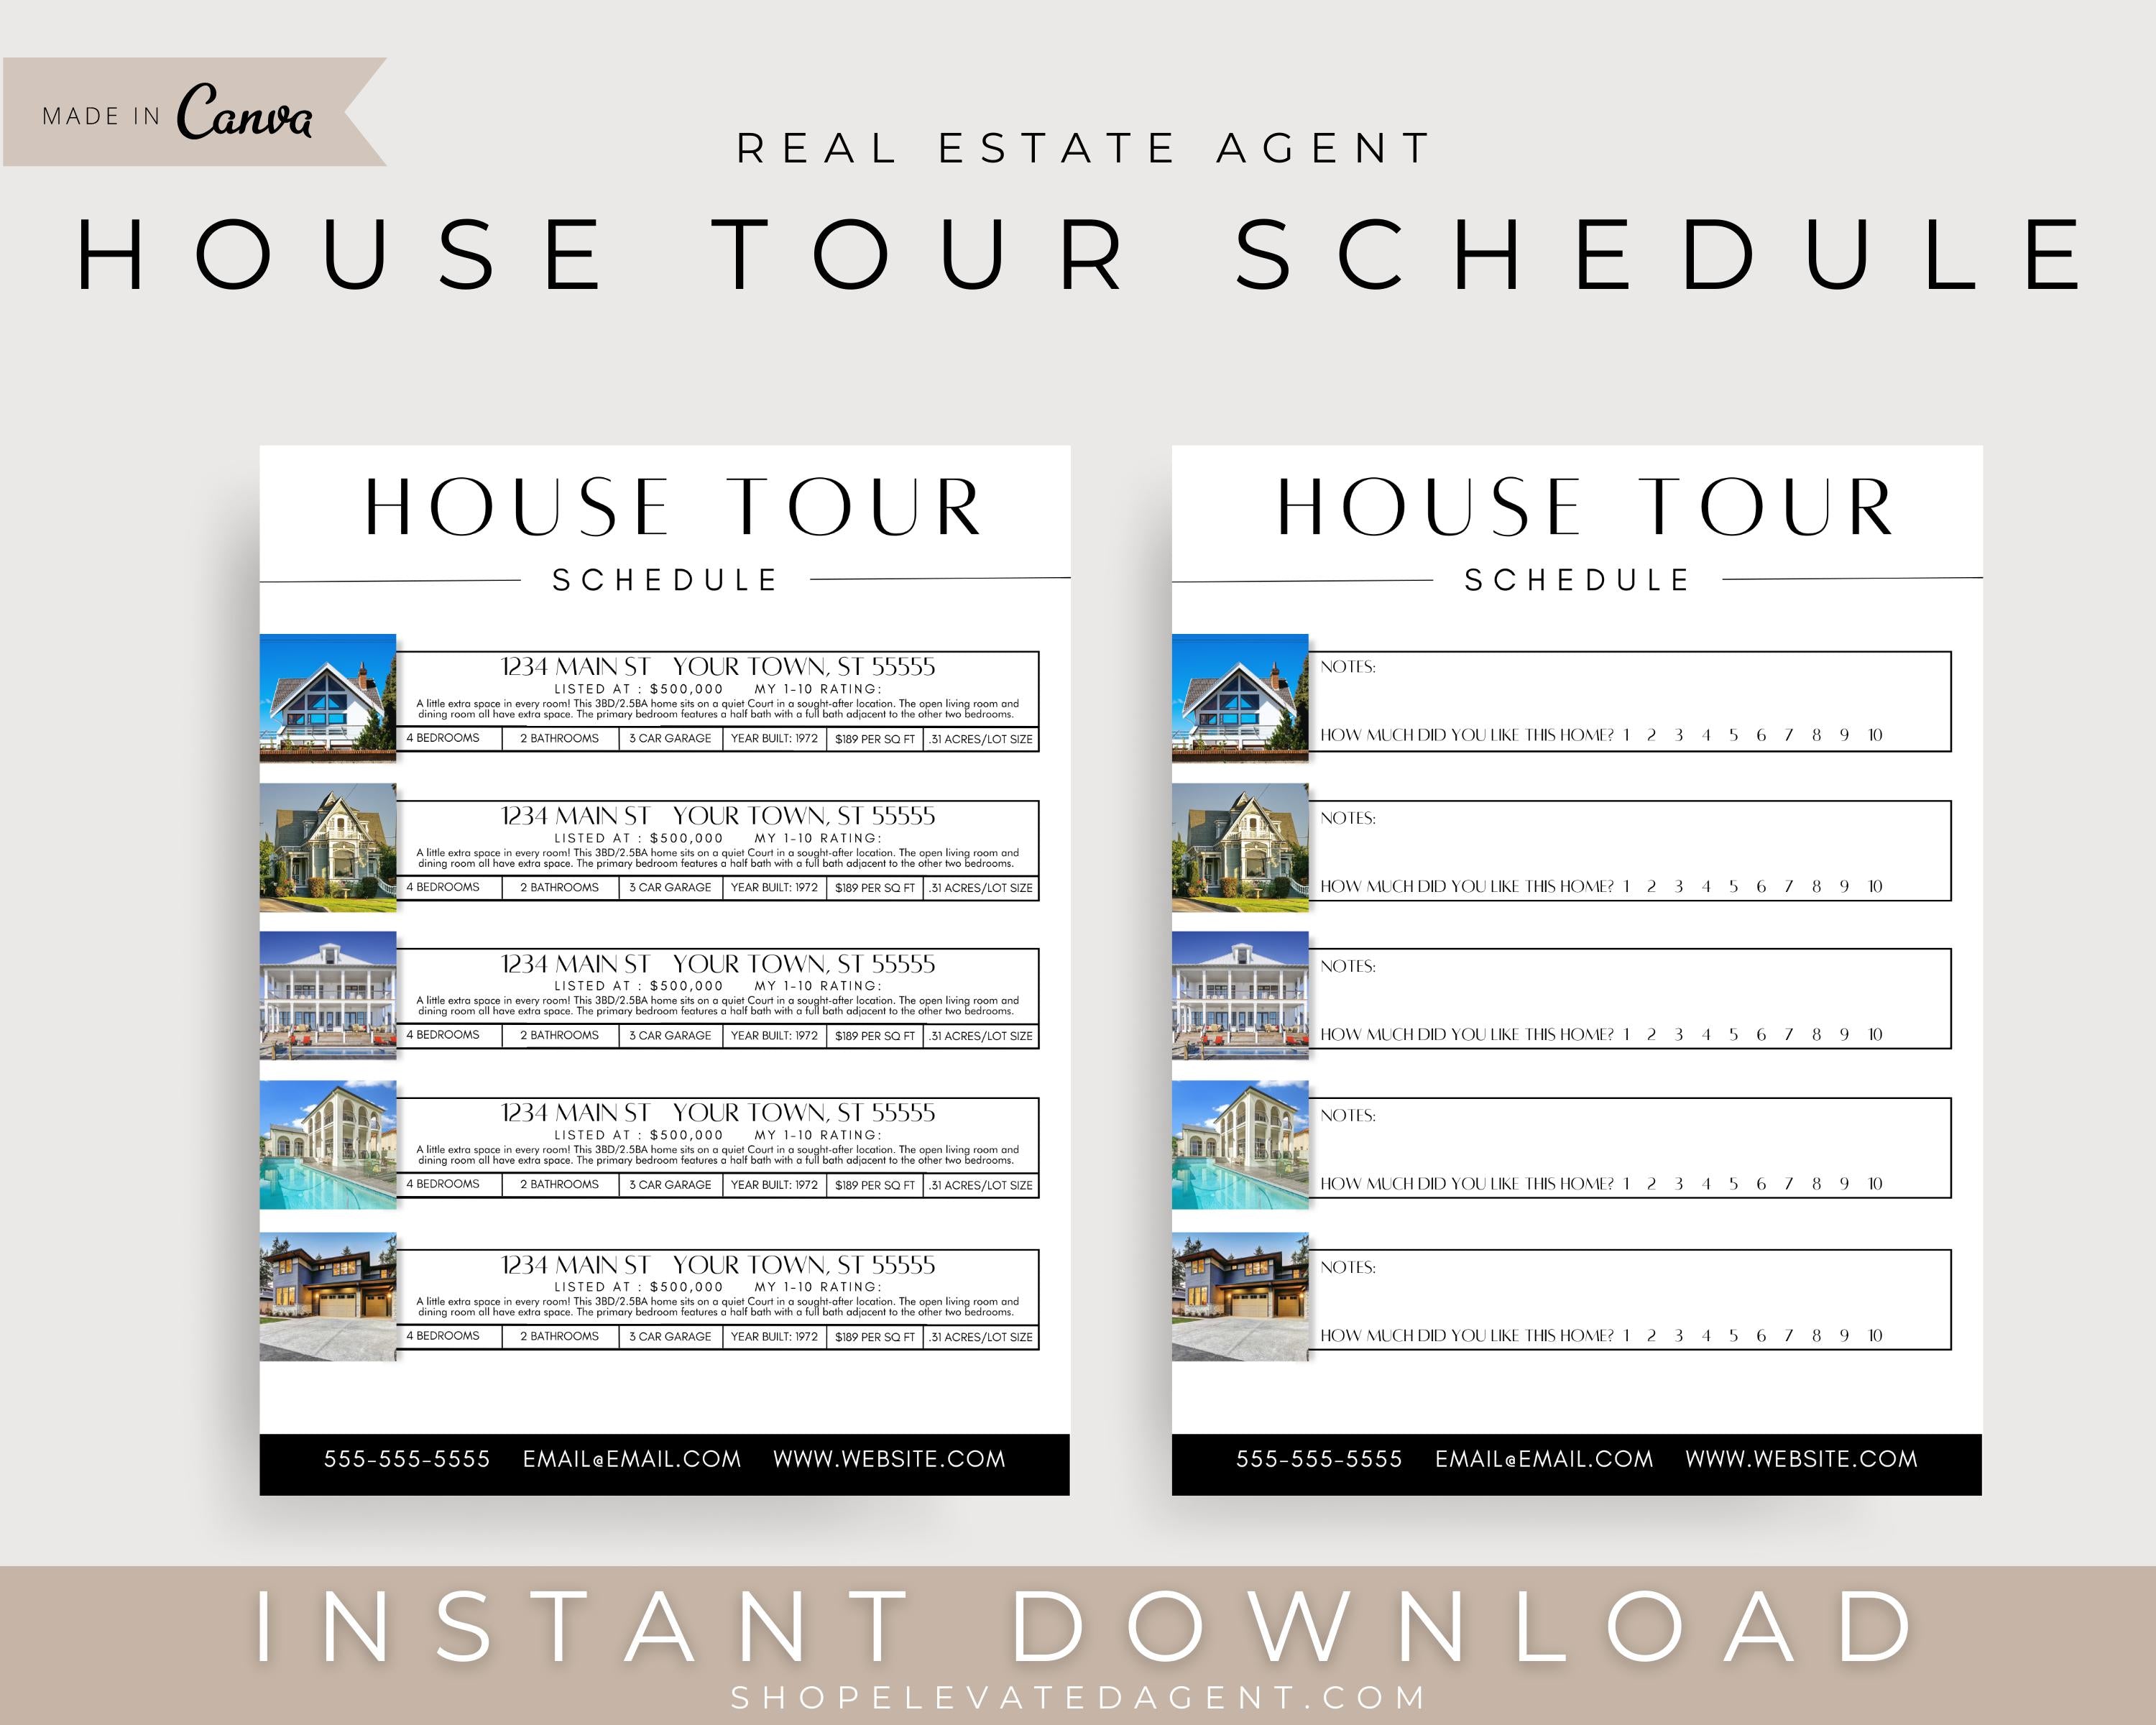 Real-Estate-Home-Tour-Schedule.jpg